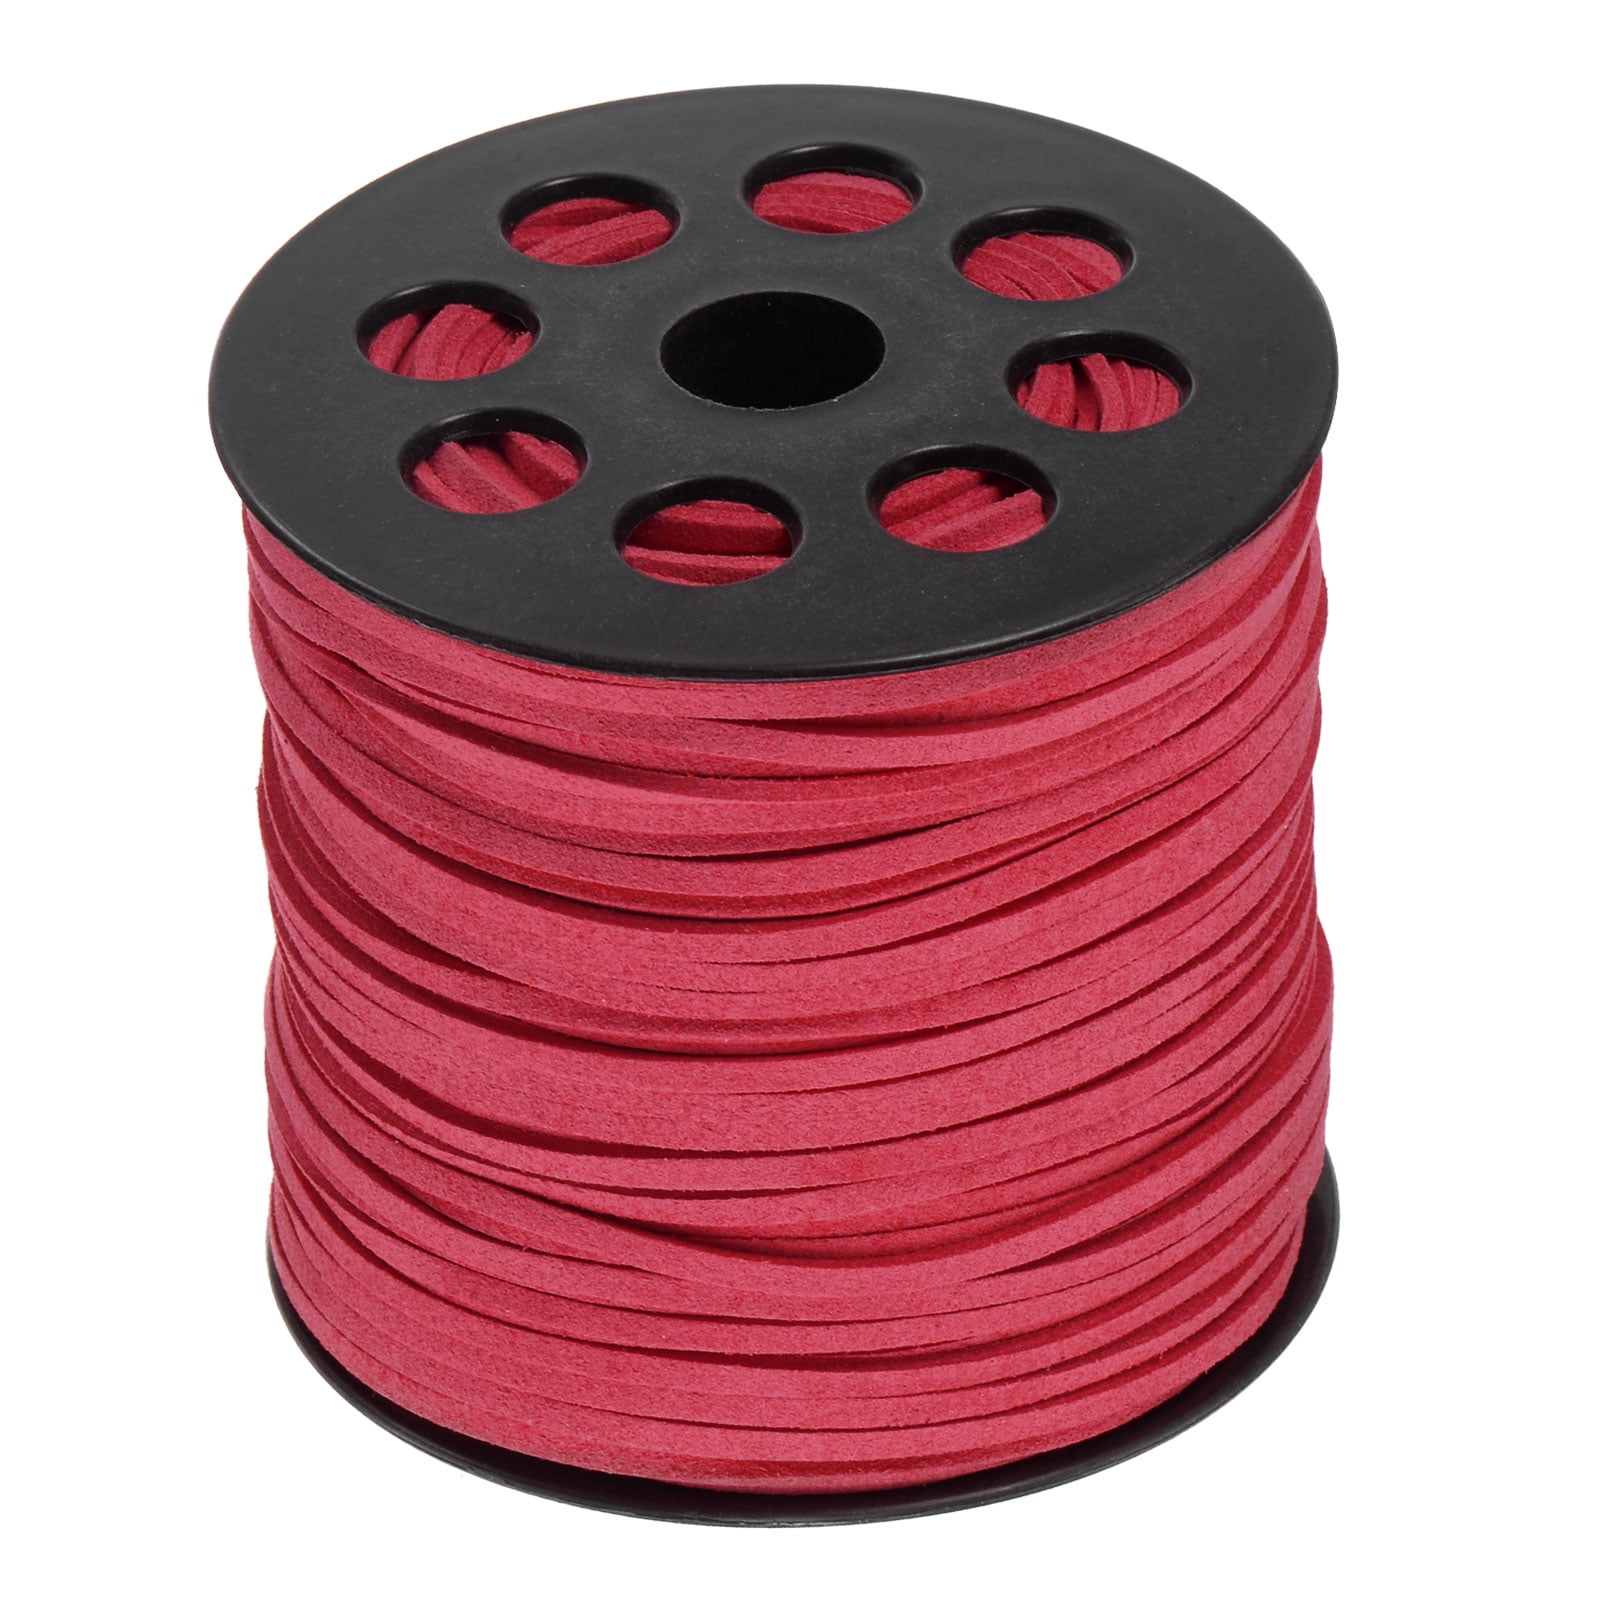 Faux Suede Cord 2.4mm Microfiber Beading Thread 100 Yards/90M Crafting  String for DIY, Charm Pink 